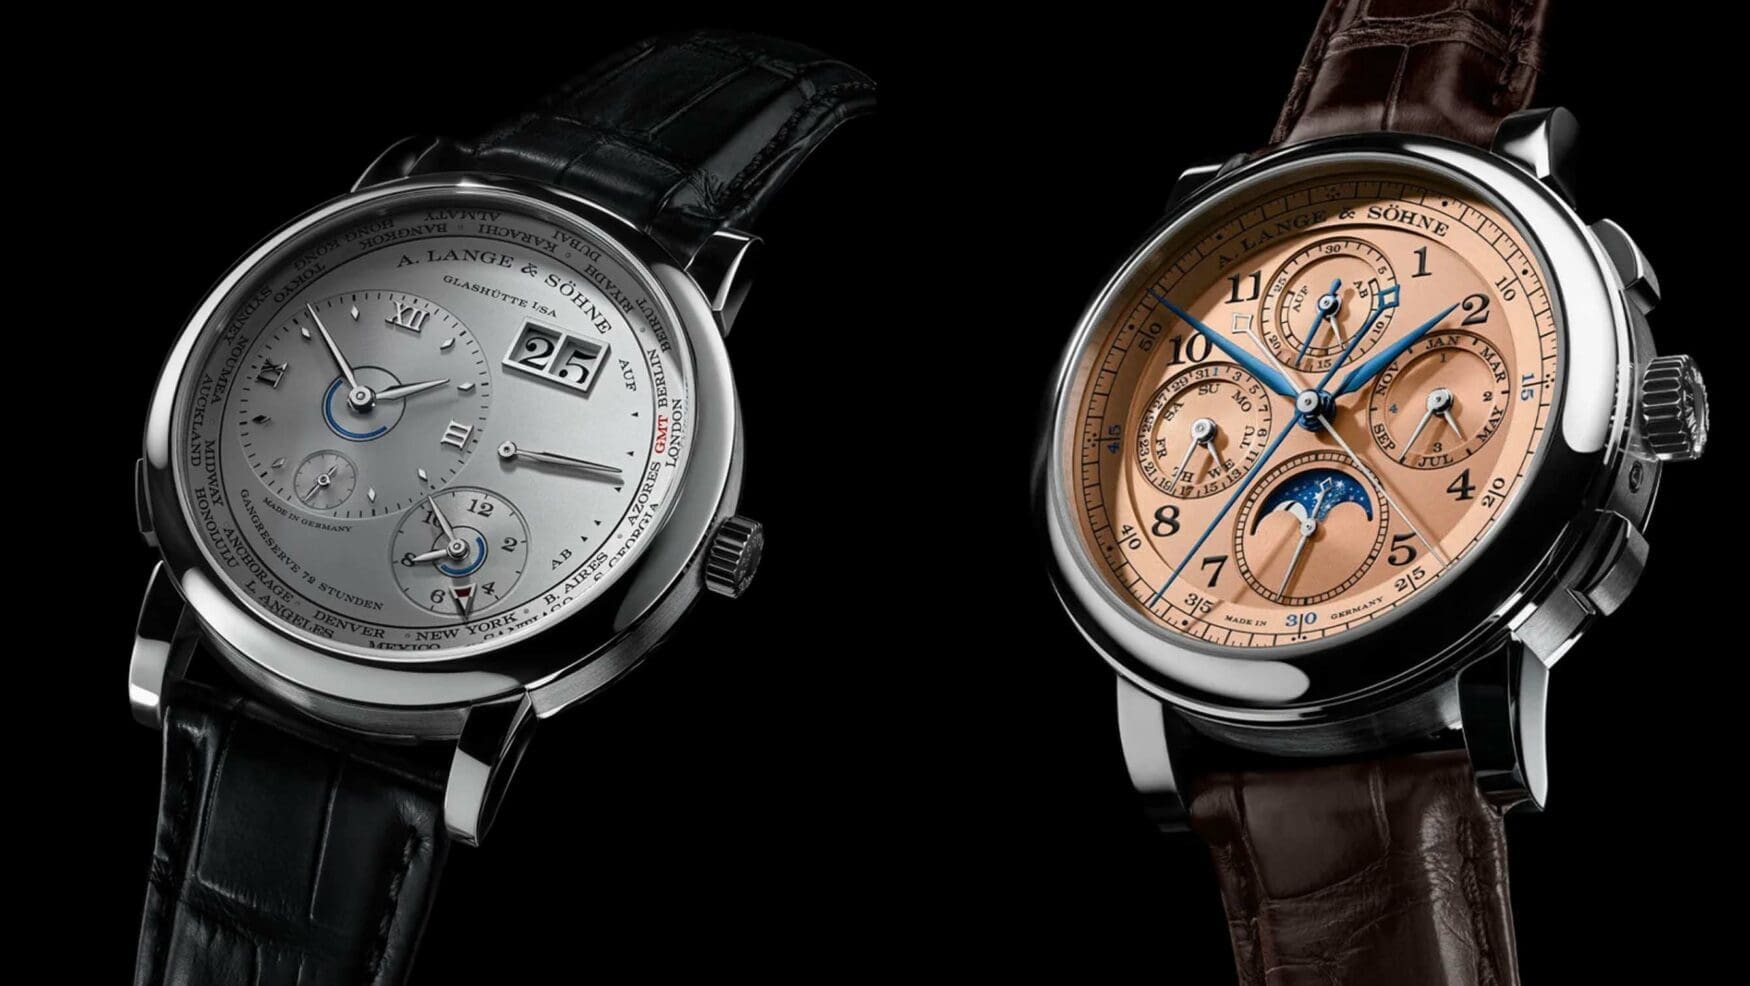 The new A. Lange & Söhne 1815 Rattrapante Perpetual Calendar and Lange 1 Time Zone